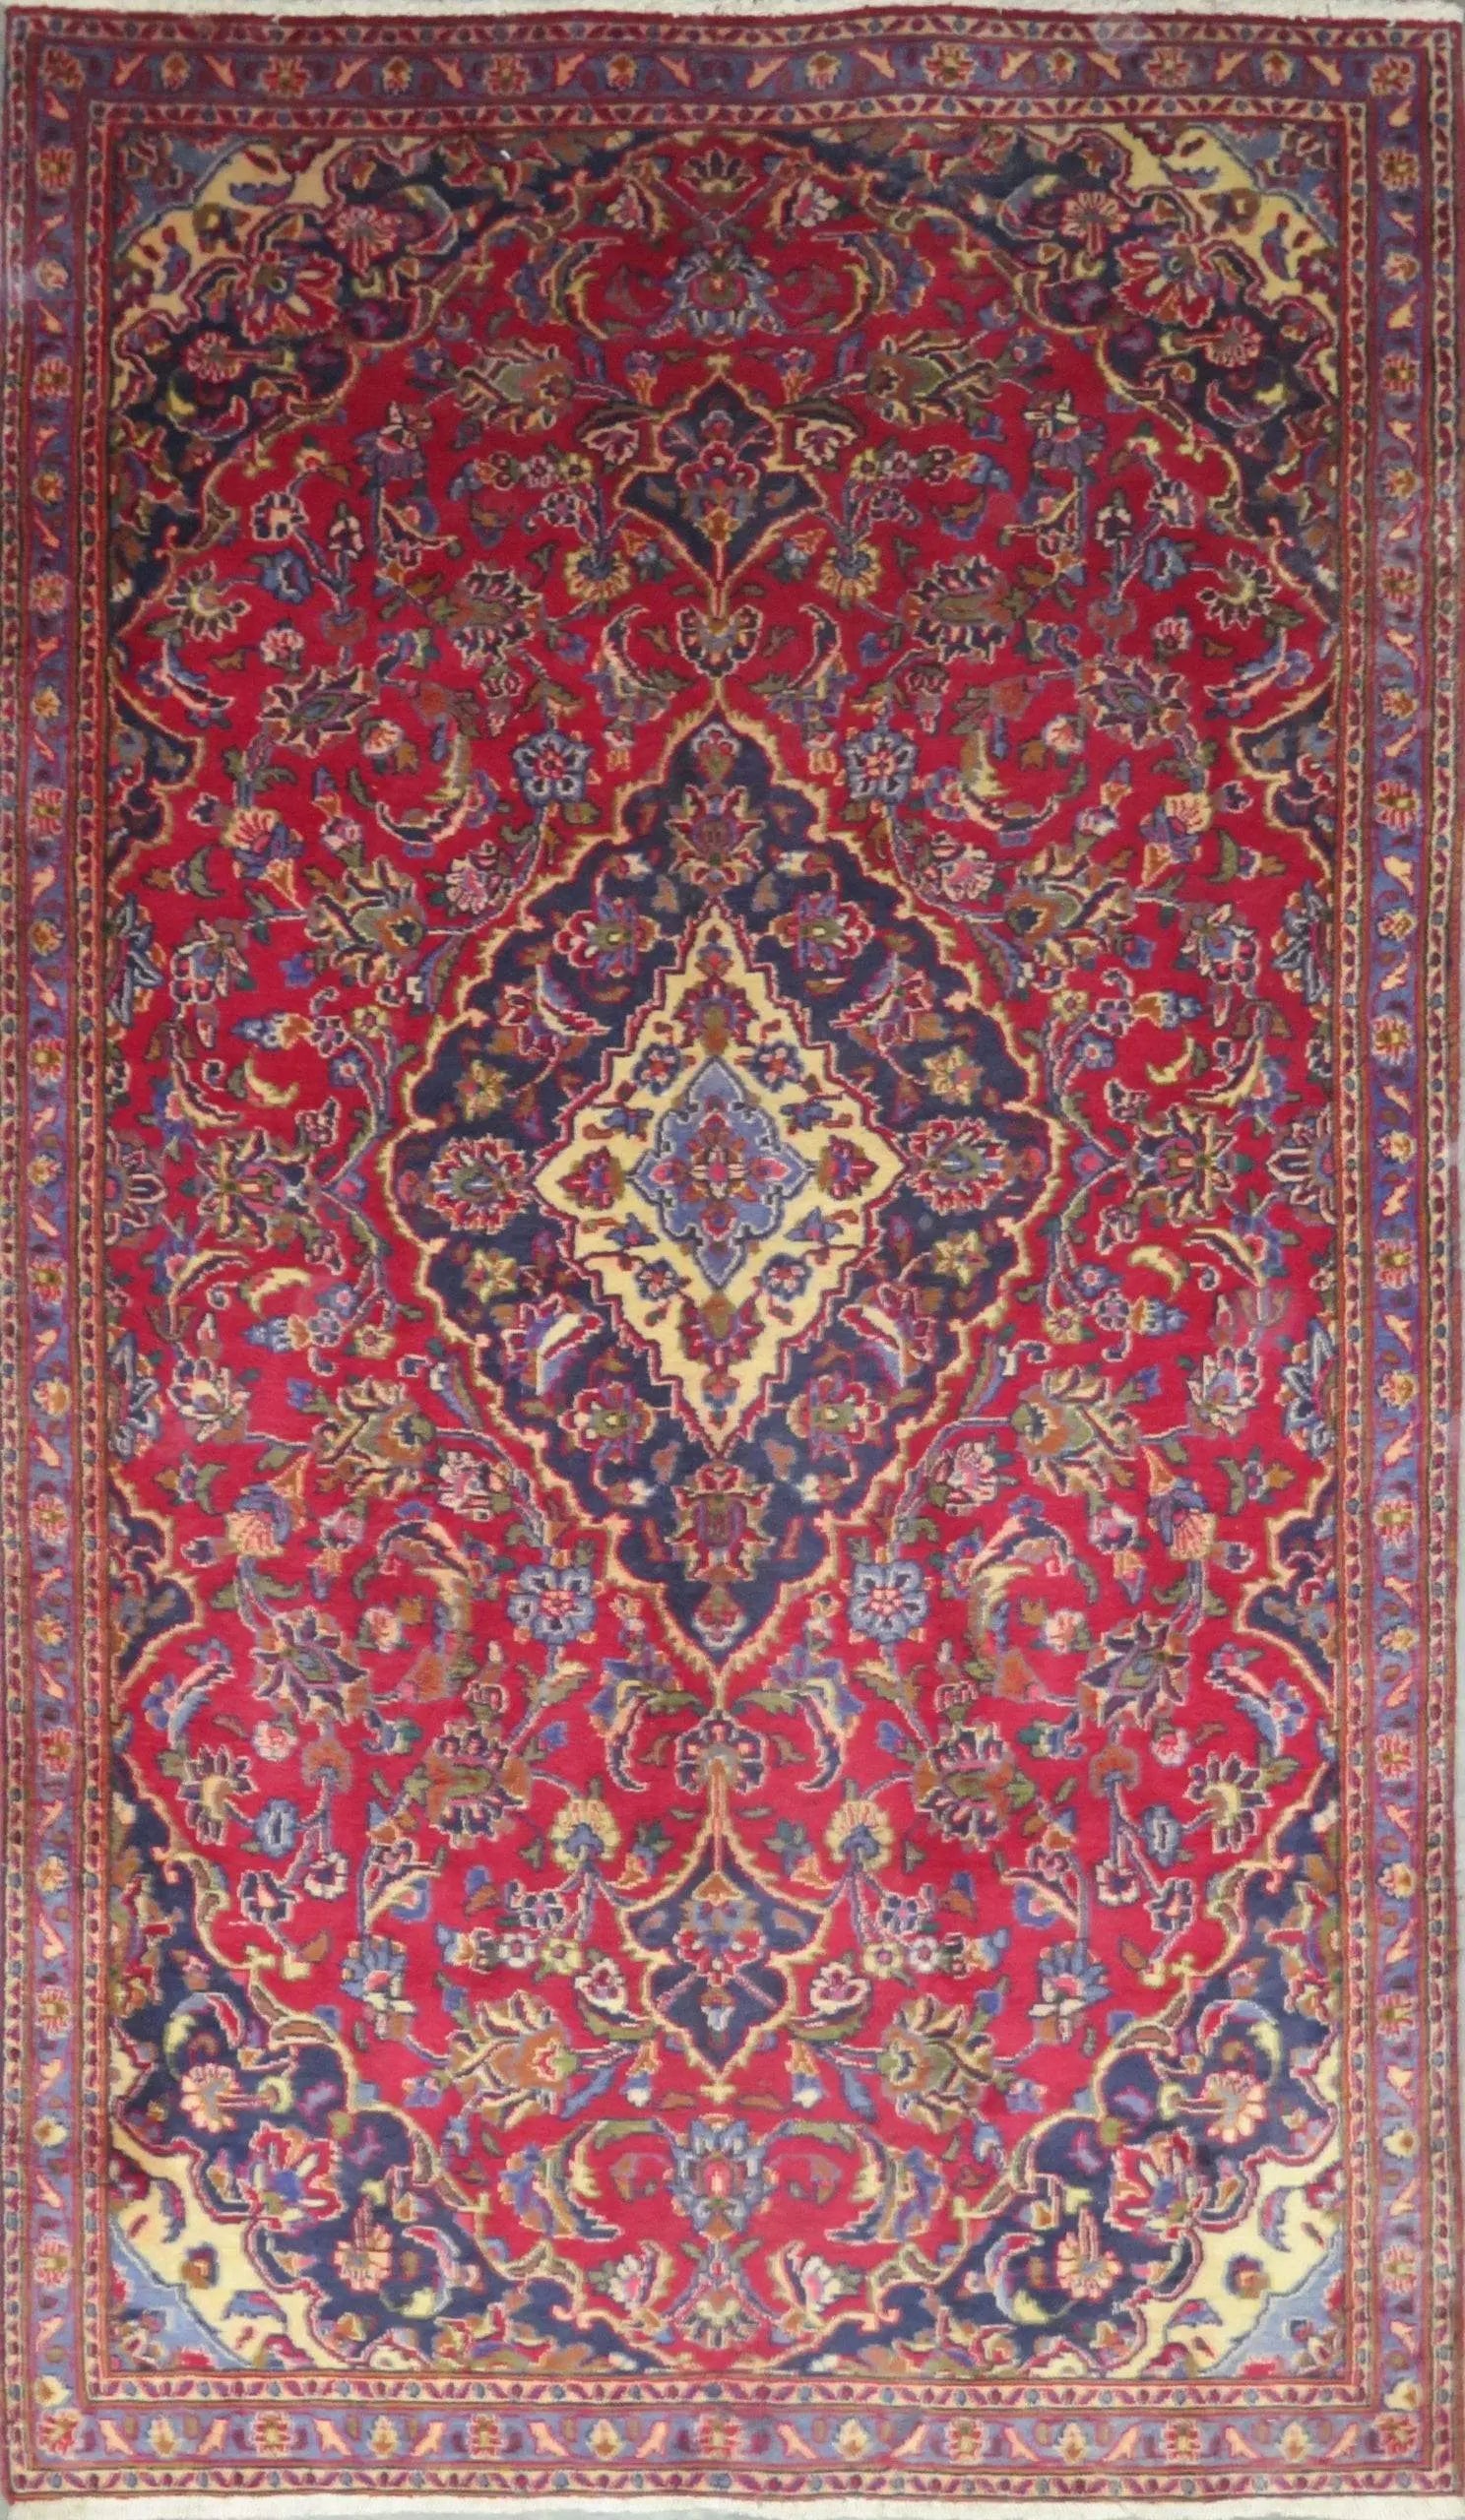 Hand-Knotted Persian Wool Rug _ Luxurious Vintage Design, 7'5" x 4'4", Artisan Crafted